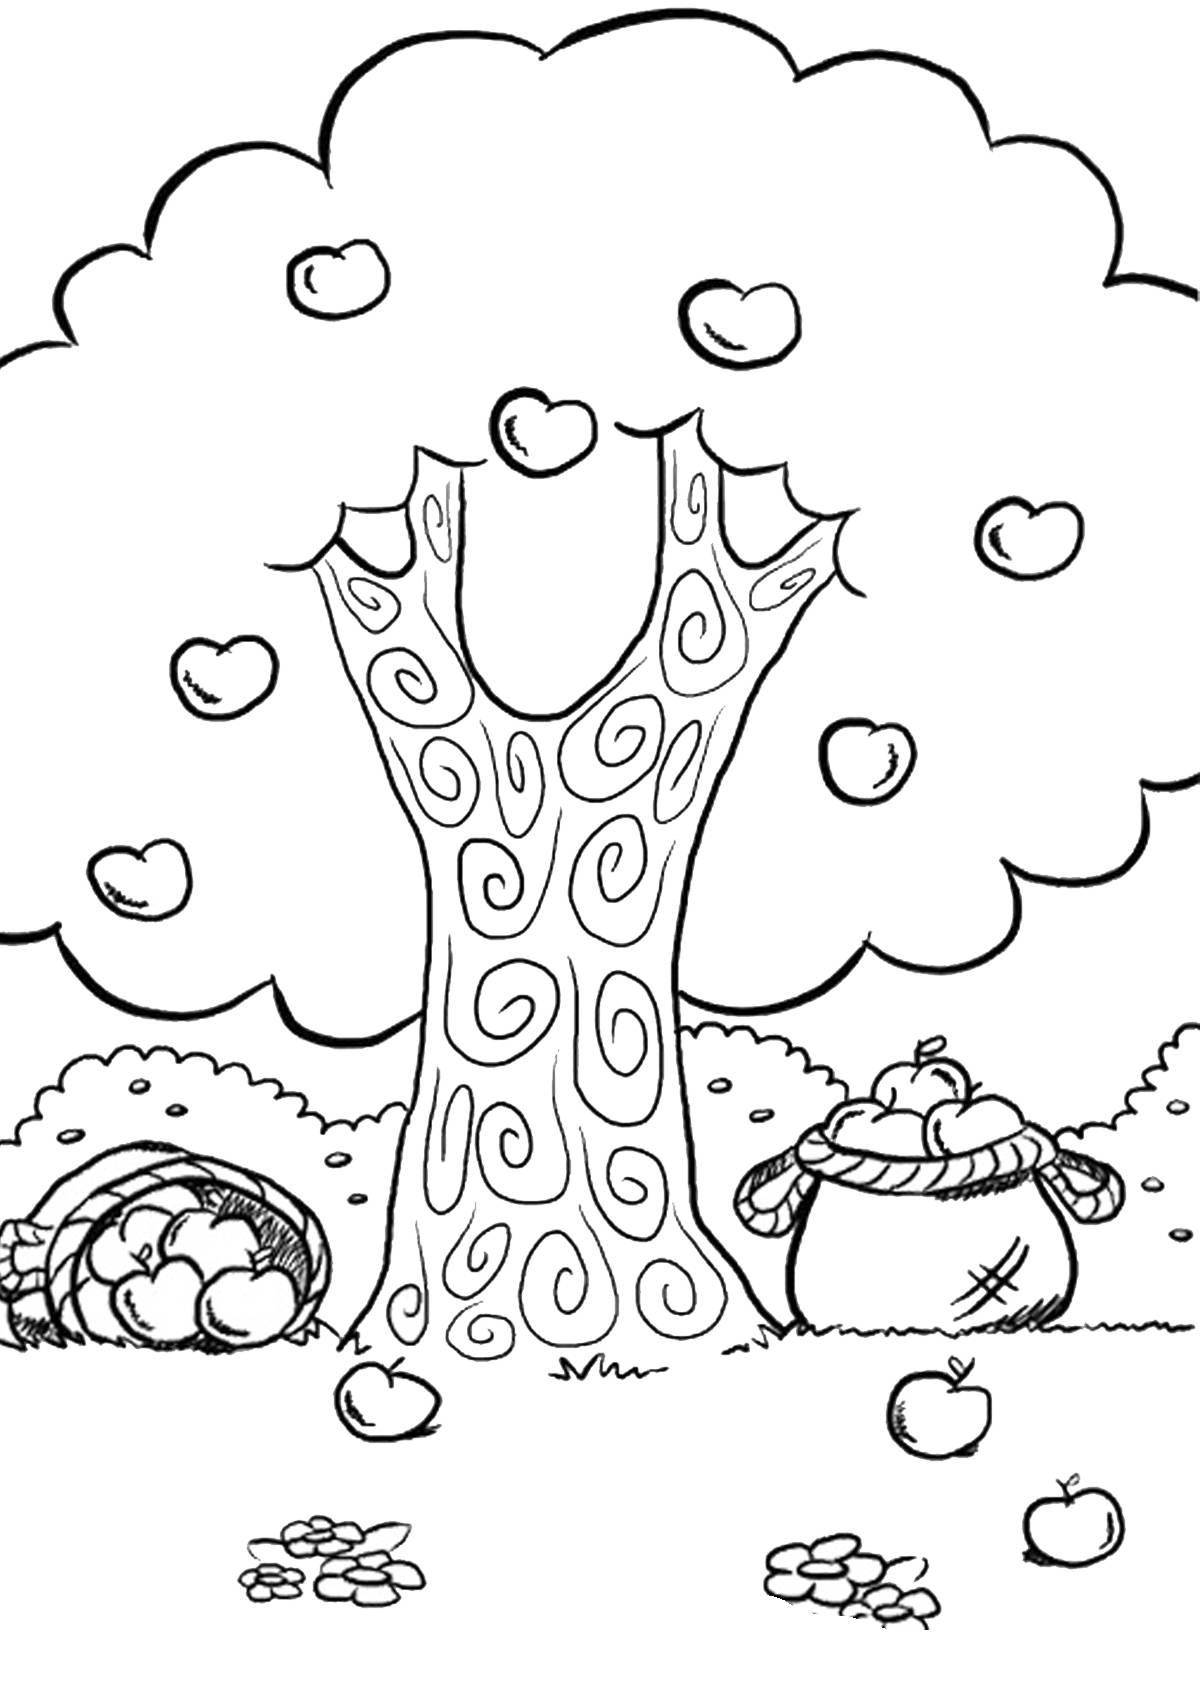 Animated tree coloring page for 5-6 year olds